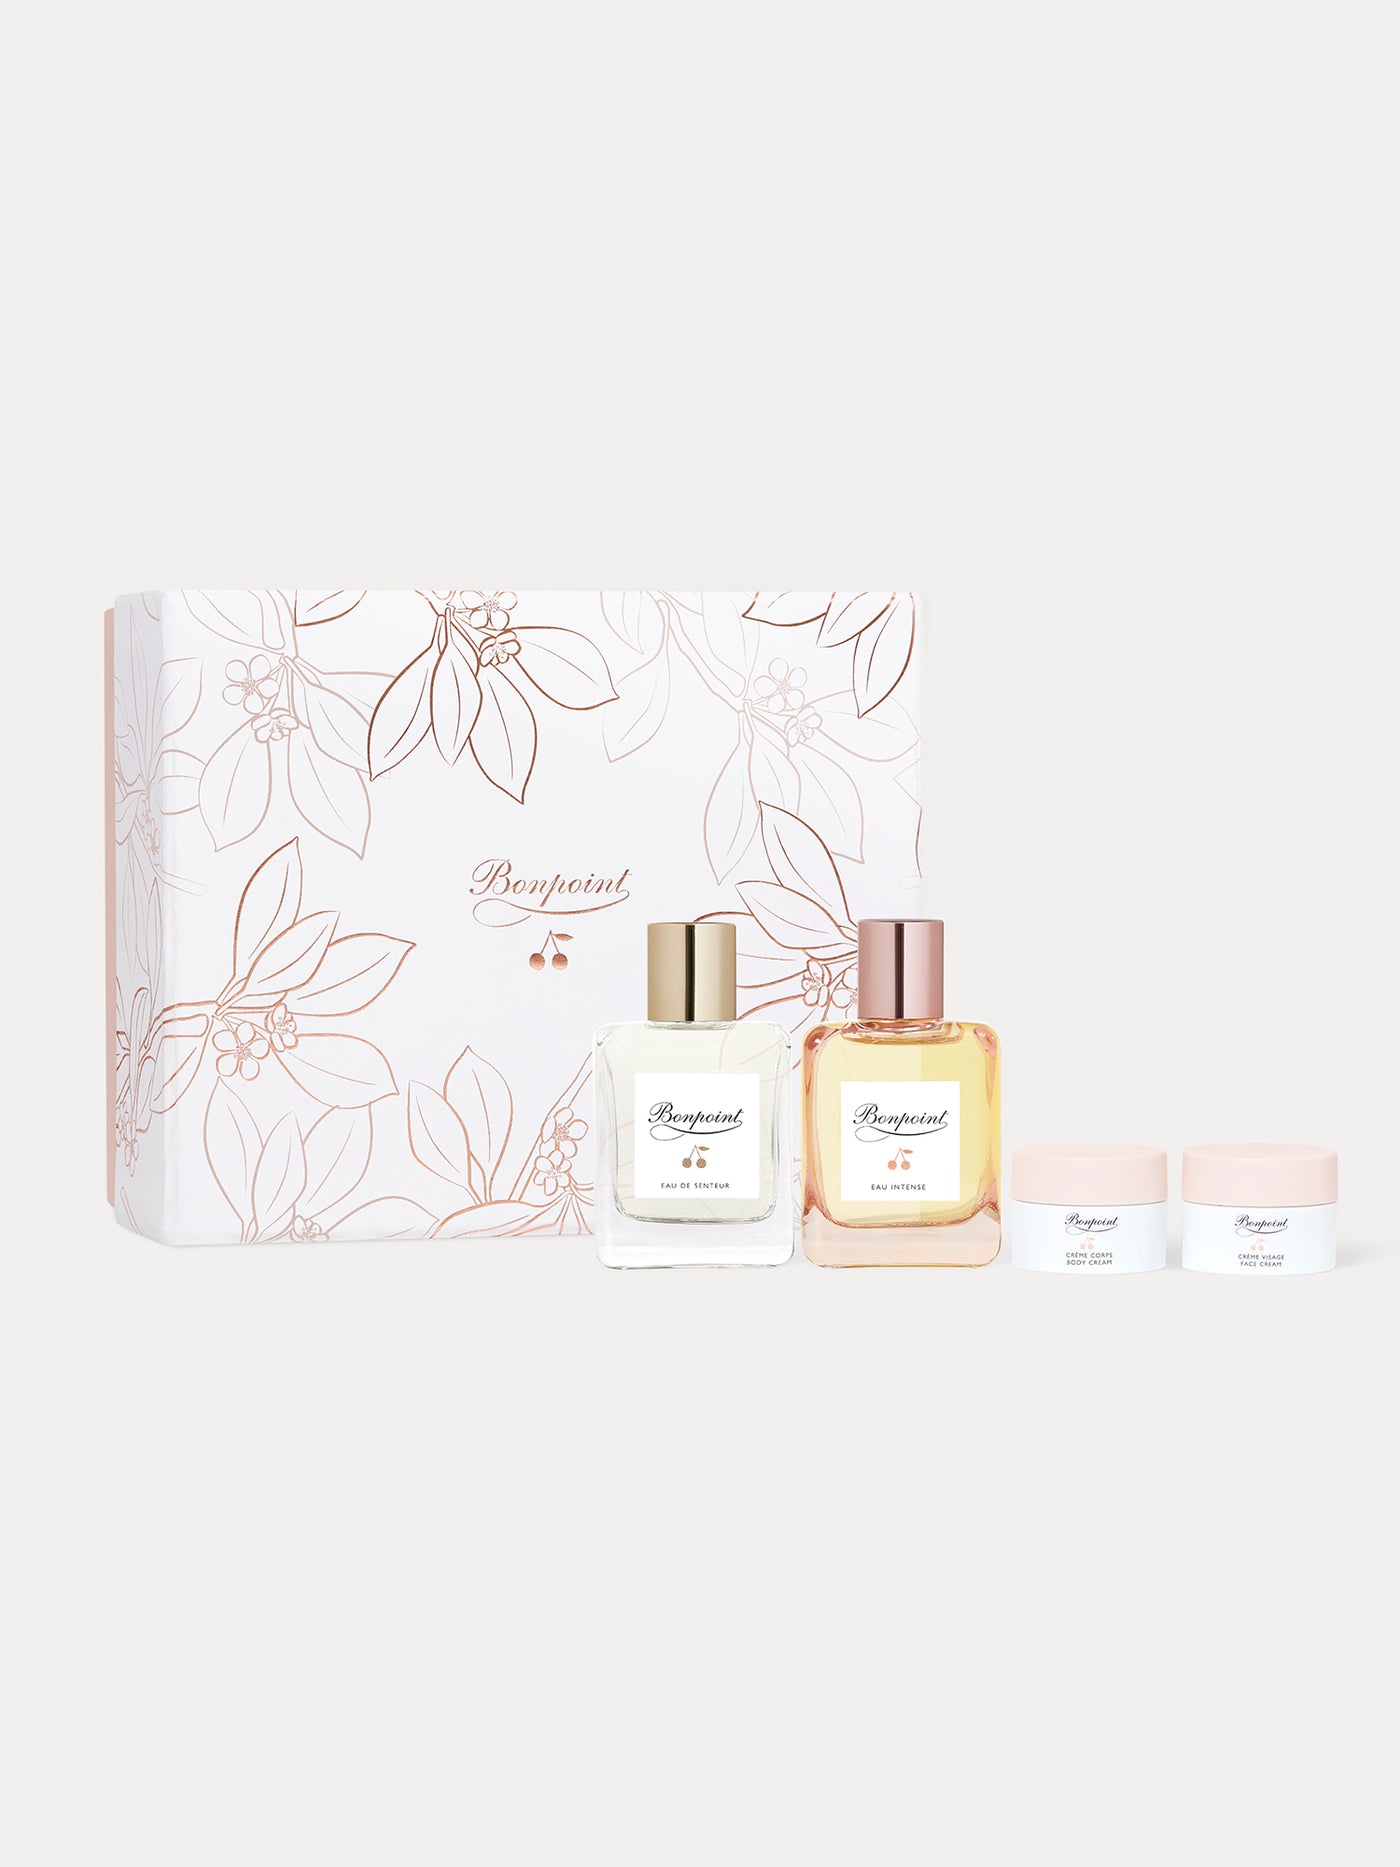 Cherry blossom scented gift - Mom and kids duo set